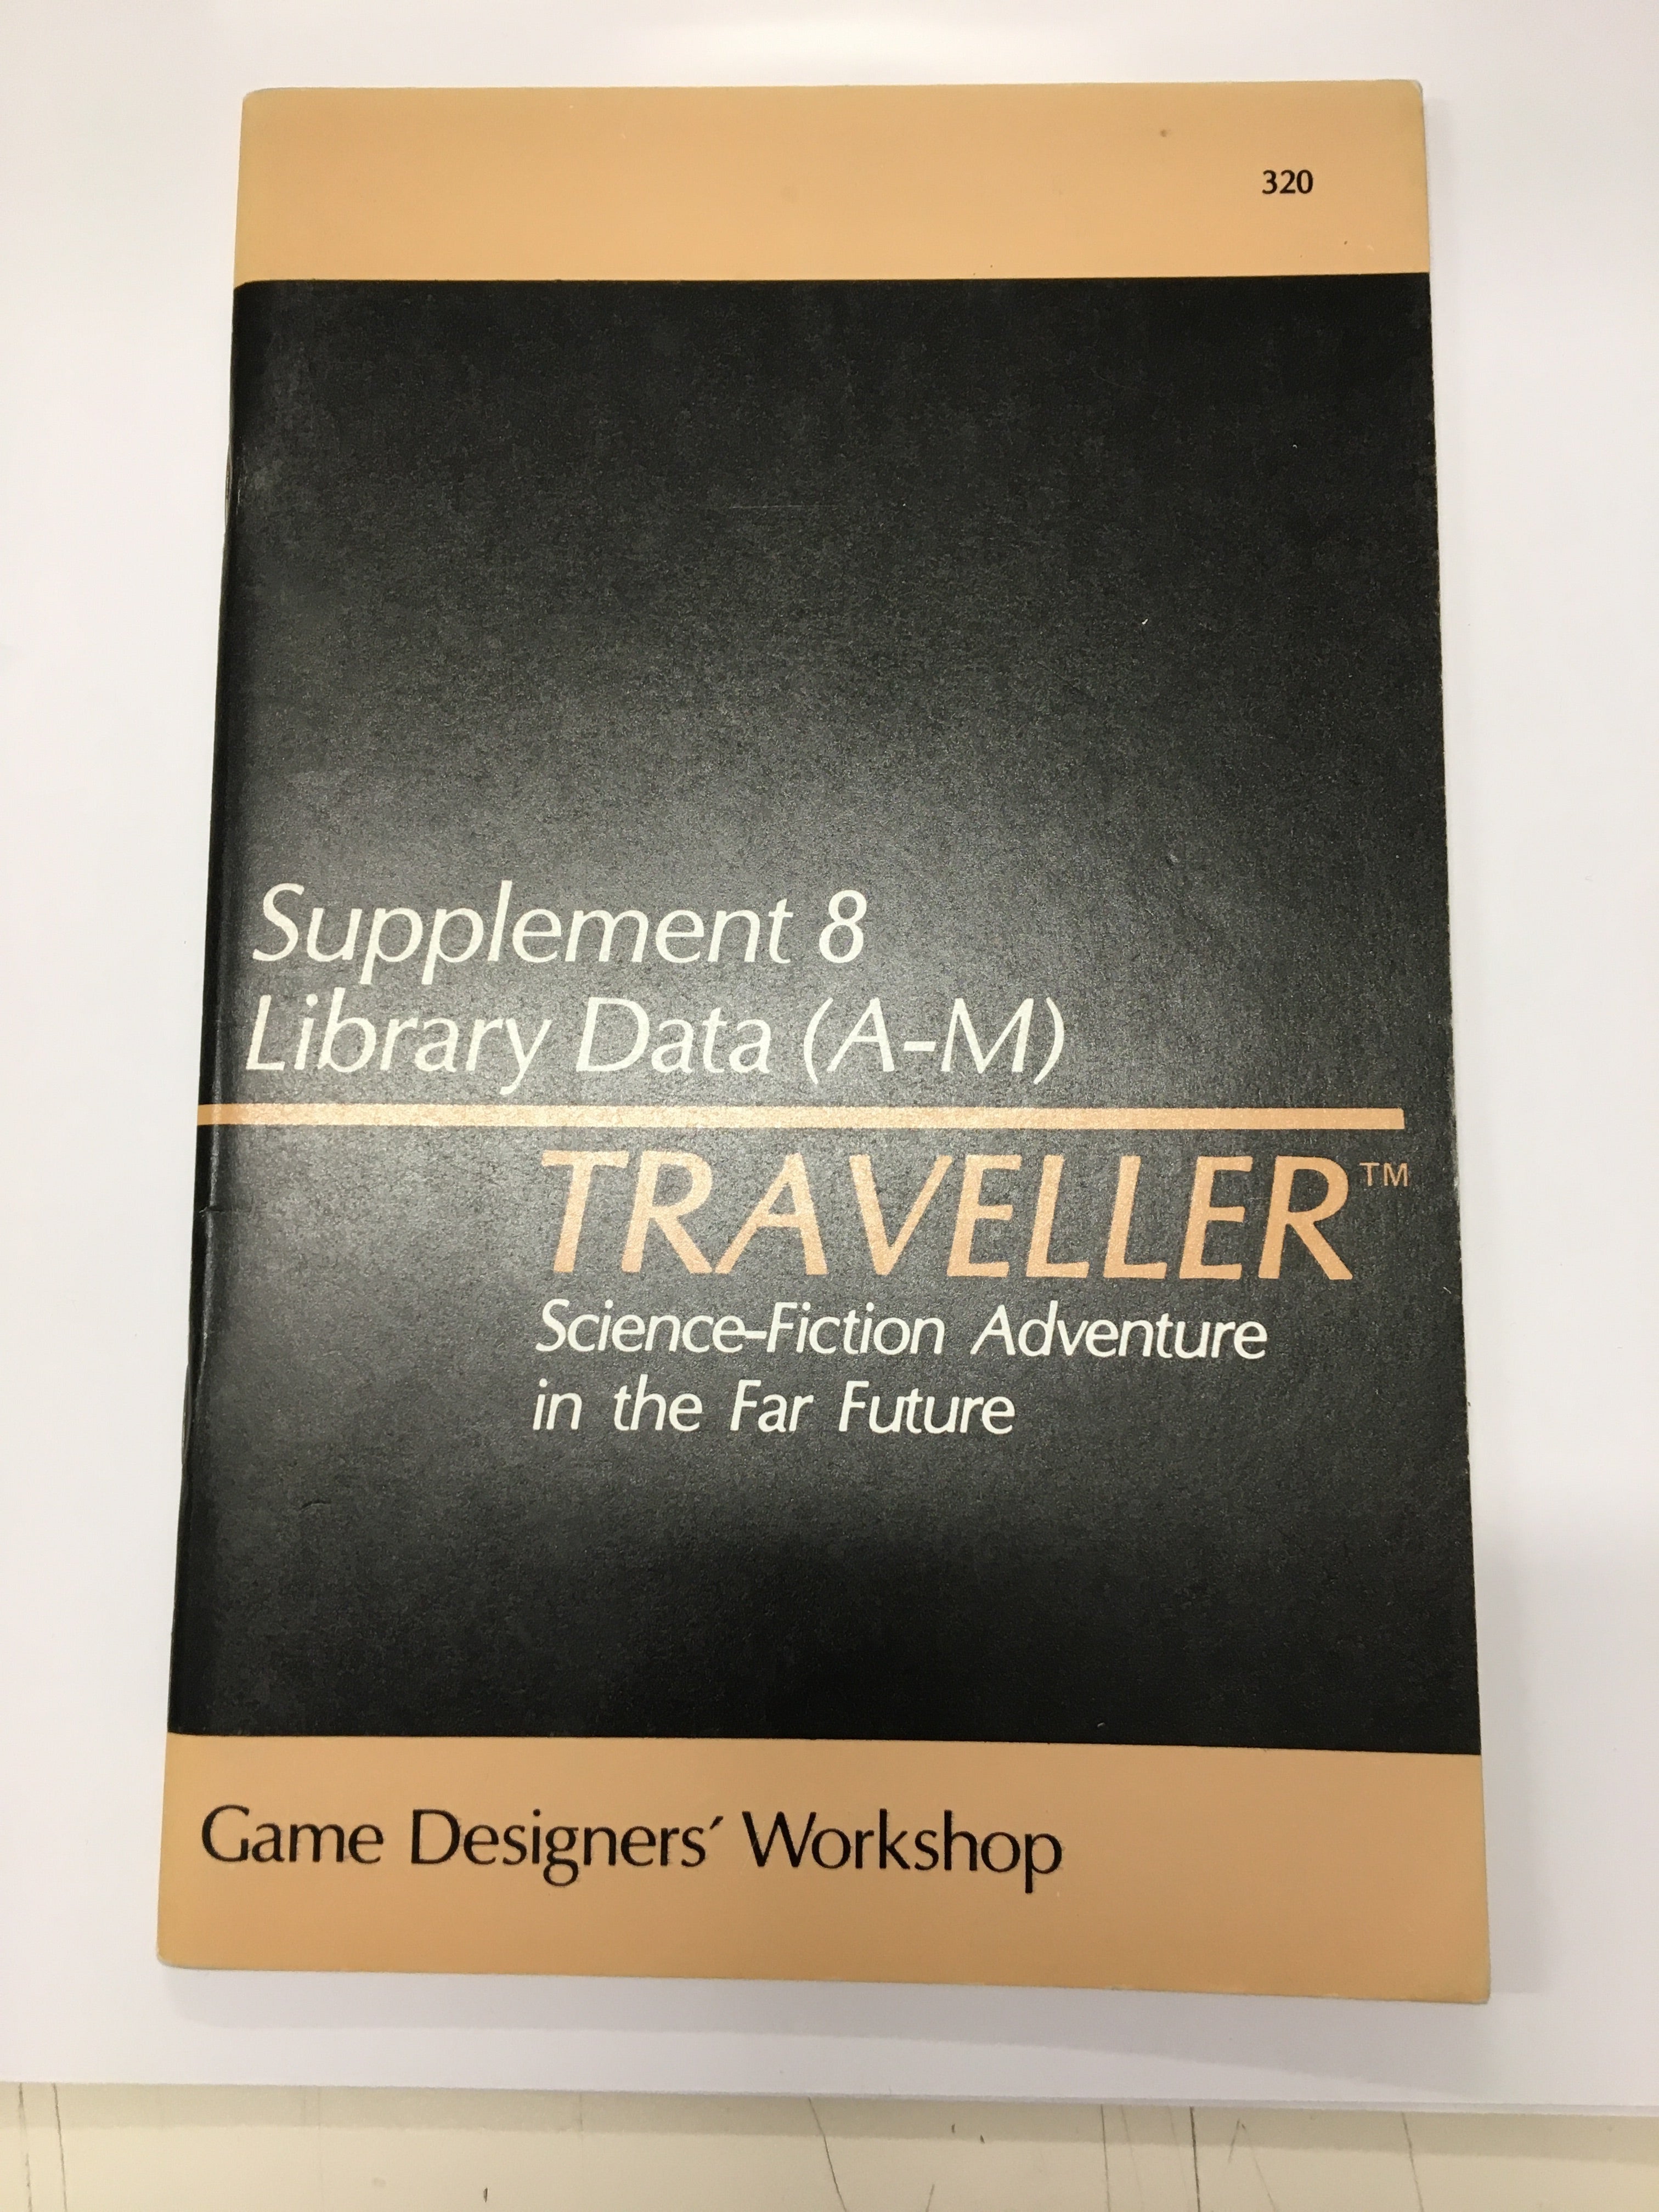 Traveller Supplement 8: Library Data (A-M) used | L.A. Mood Comics and Games